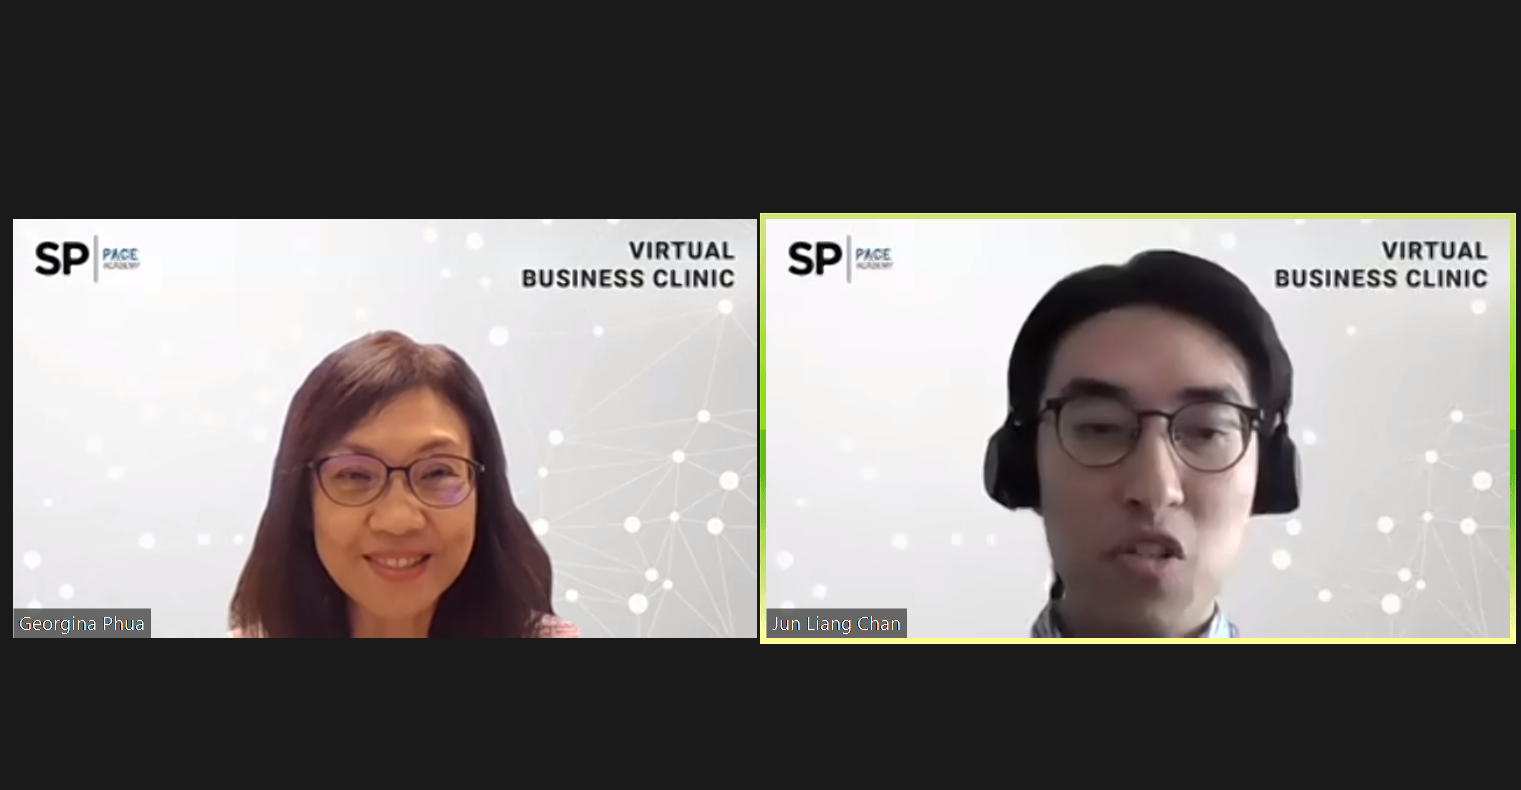 2-SP PACE Academy Virtual Business Clinic 2022